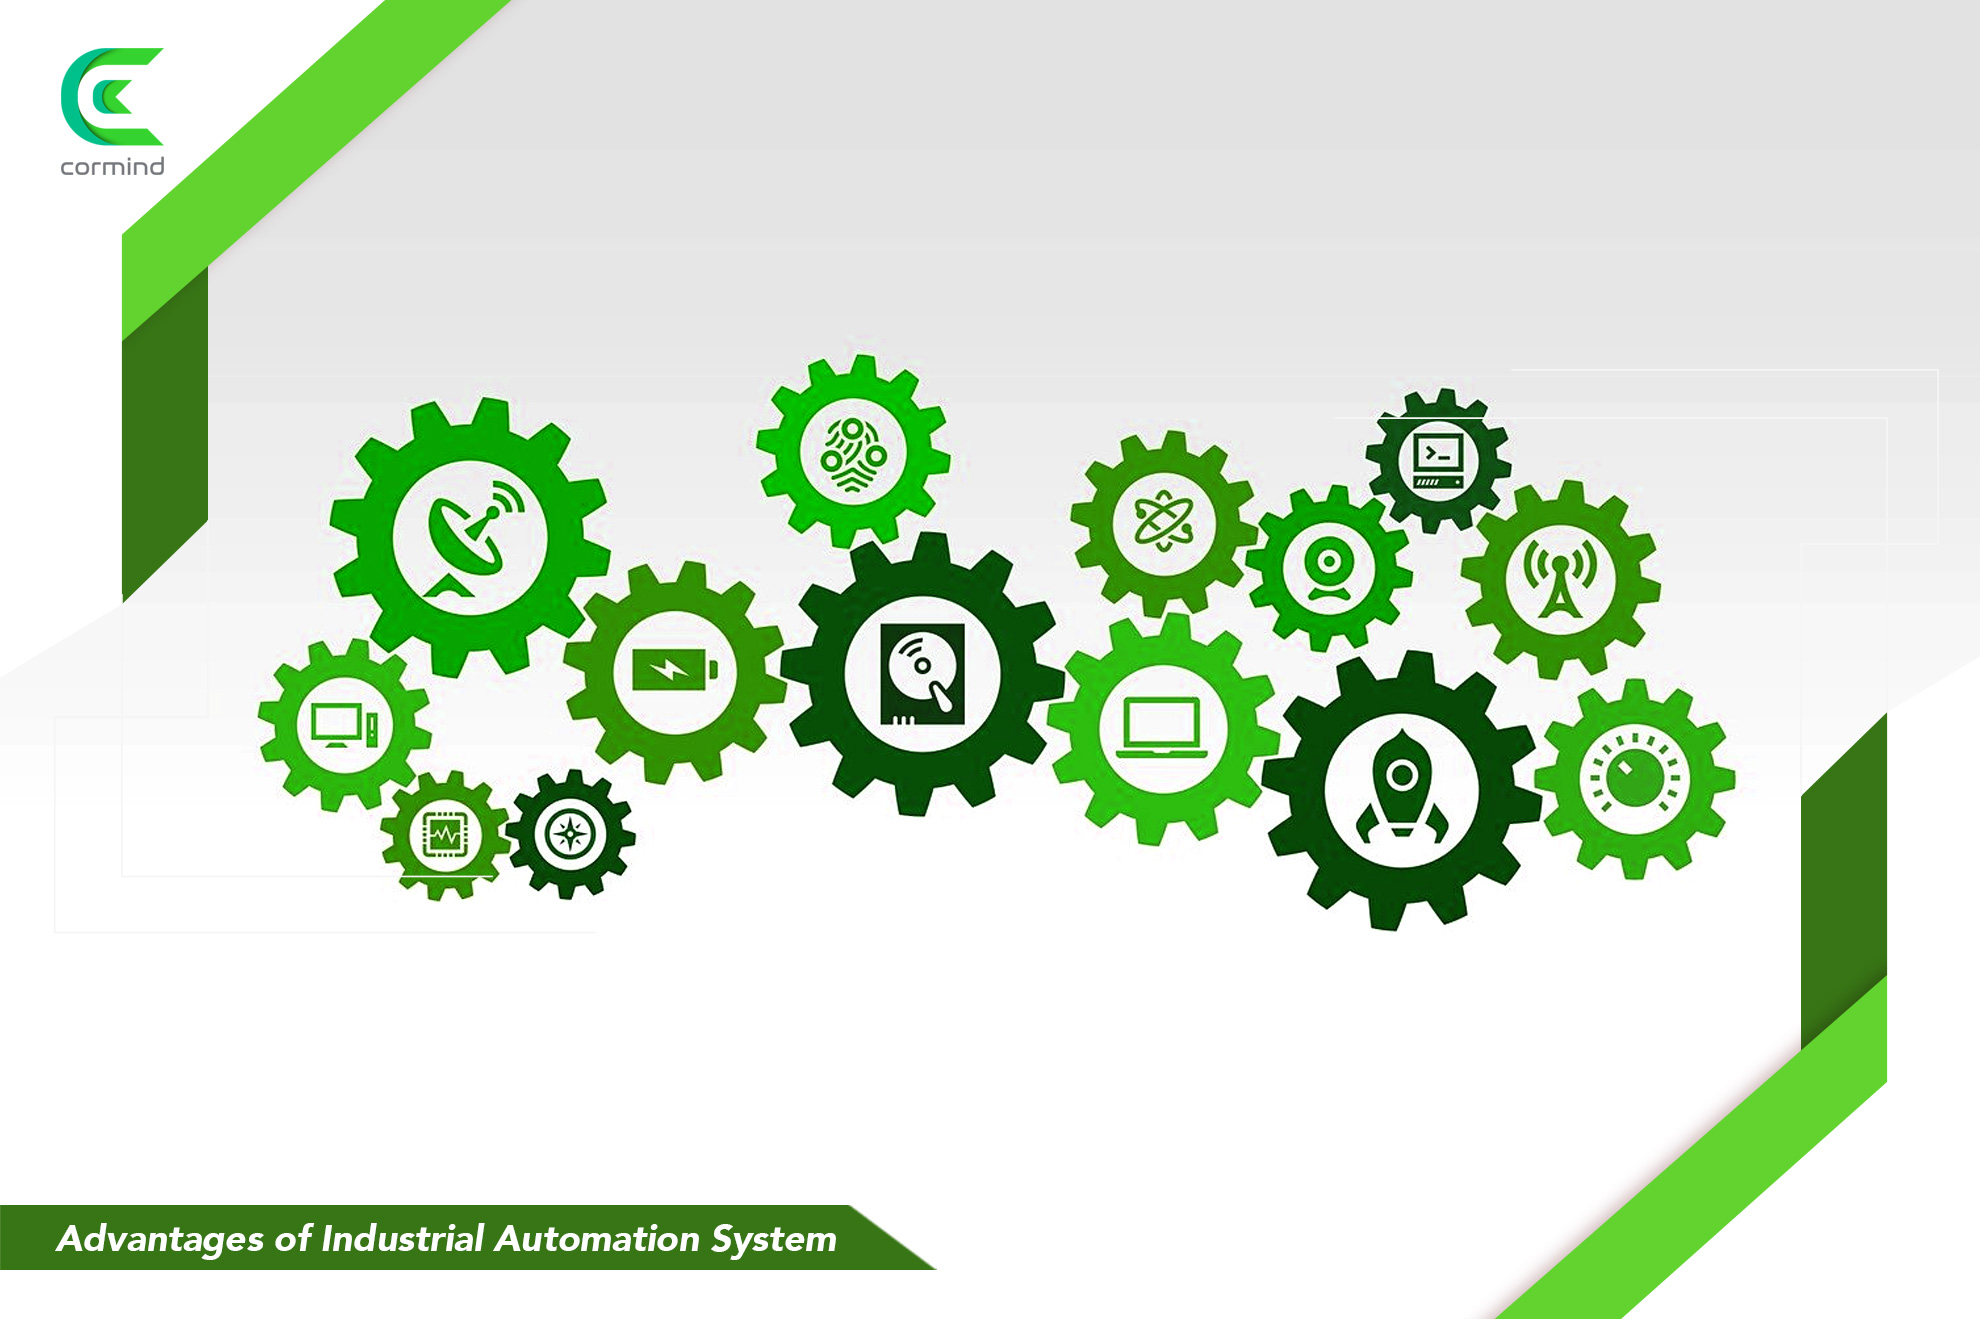 benefits of industrial automation, advantages of automation in industry, pros of industrial automation system, positive impacts of automation in manufacturing, why implement industrial automation, ROI of industrial automation Improvements from industrial automation, cost savings with automation in industry, increased productivity through automation, competitive advantages of industrial automation,